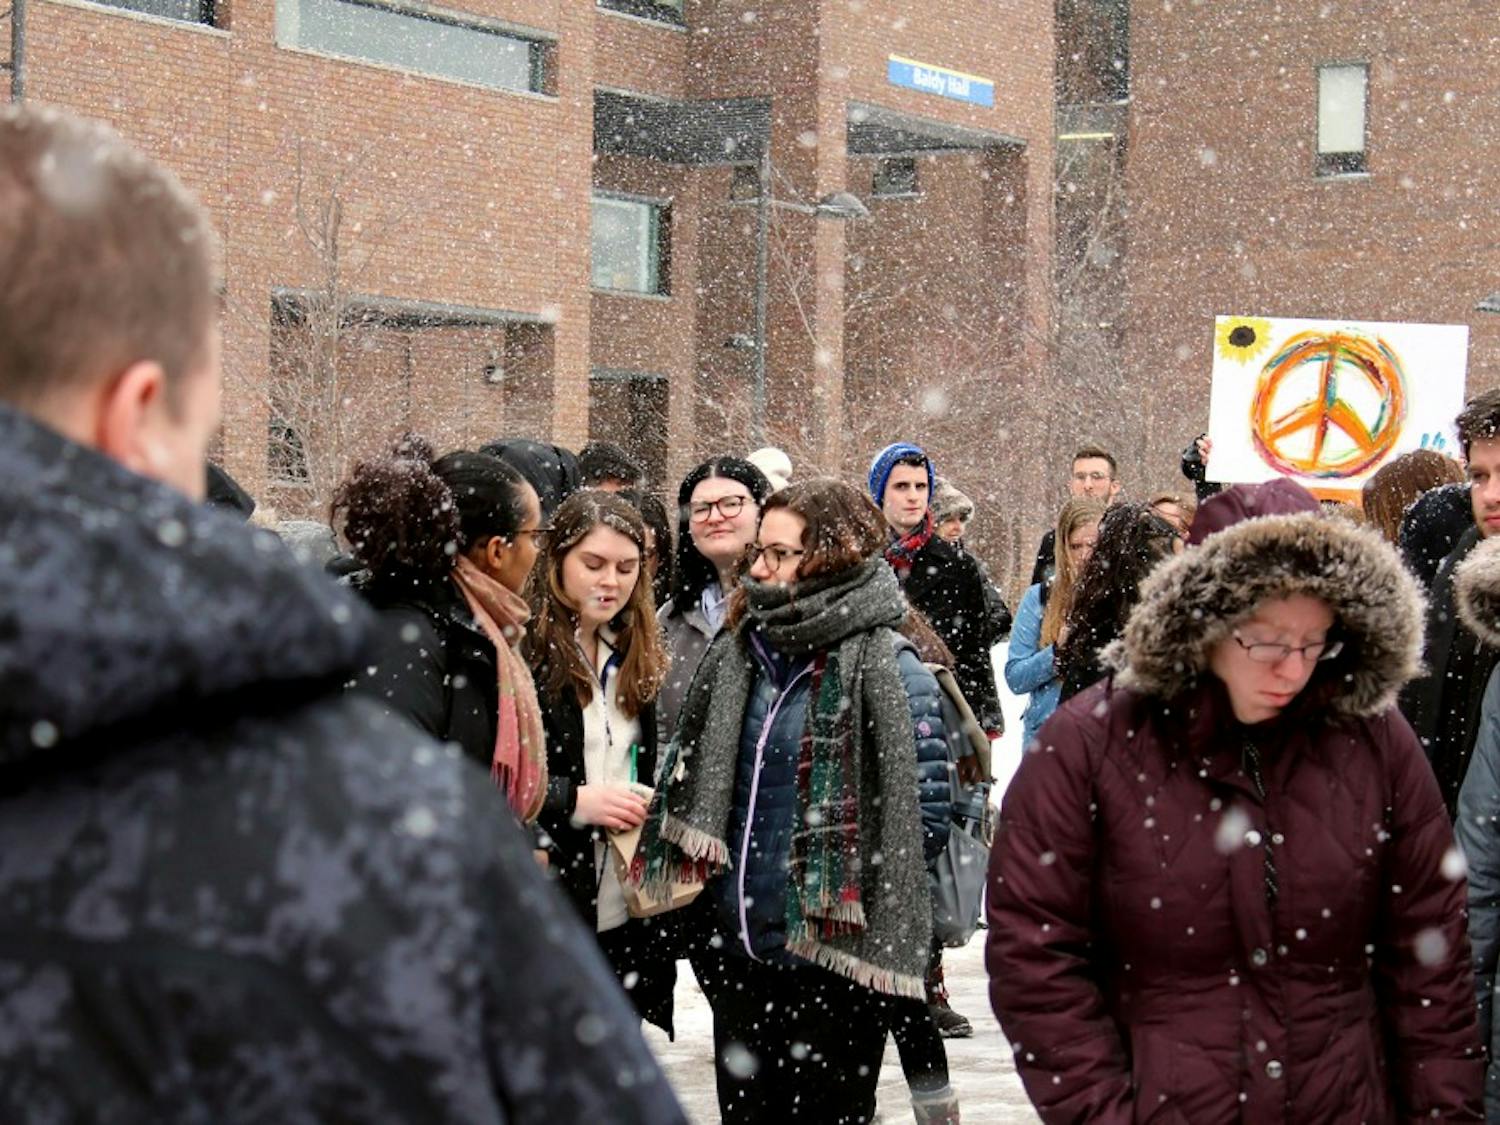 UB students participating in the National School Walkout to protest gun violence on Wednesday. The protest lasted for 17 minutes to honor the 17 people killed in the Stoneman Douglas High School shooting.